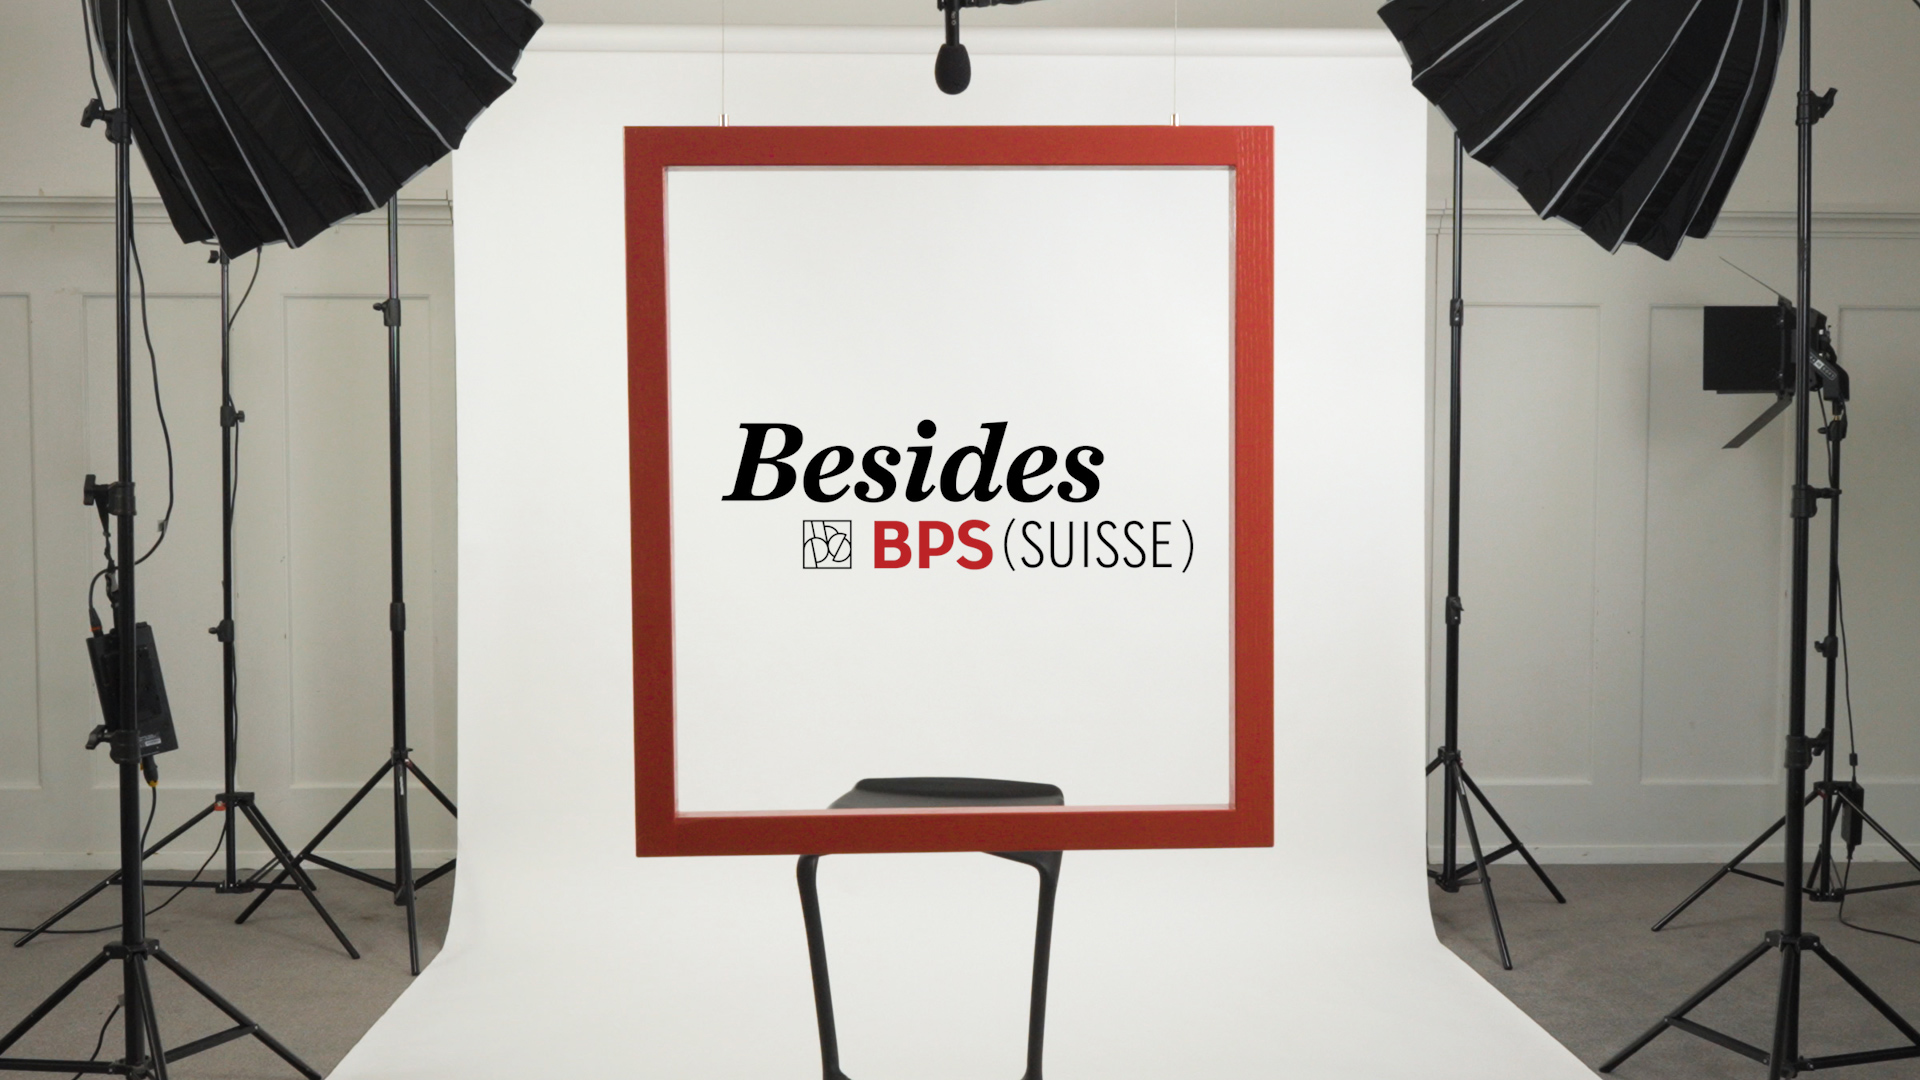 Besides BPS (SUISSE) - Our employees present themselves